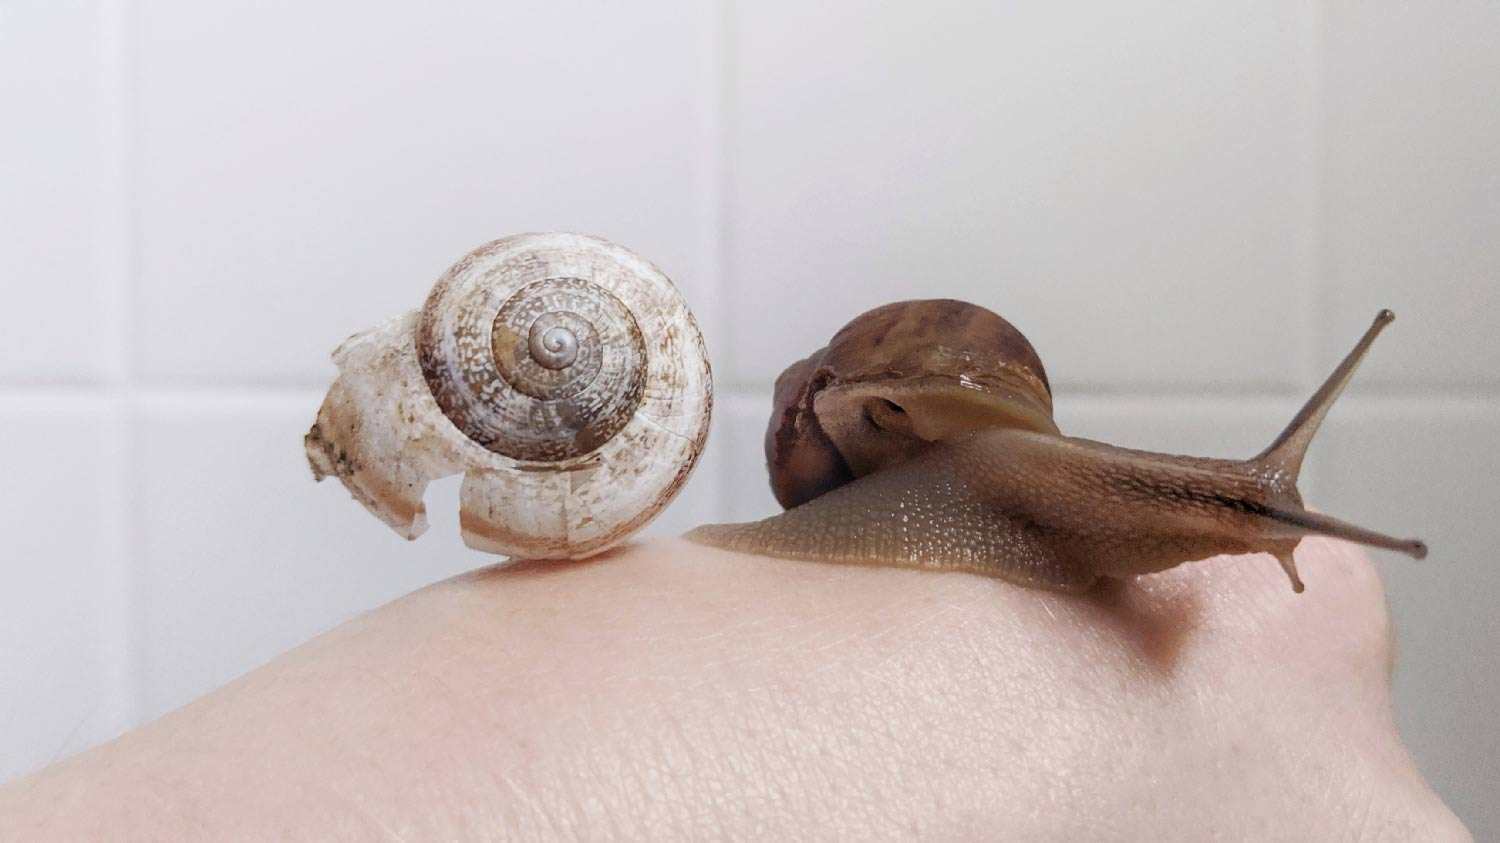 Photo © Kristy Headley, Snail and Shell, 2020